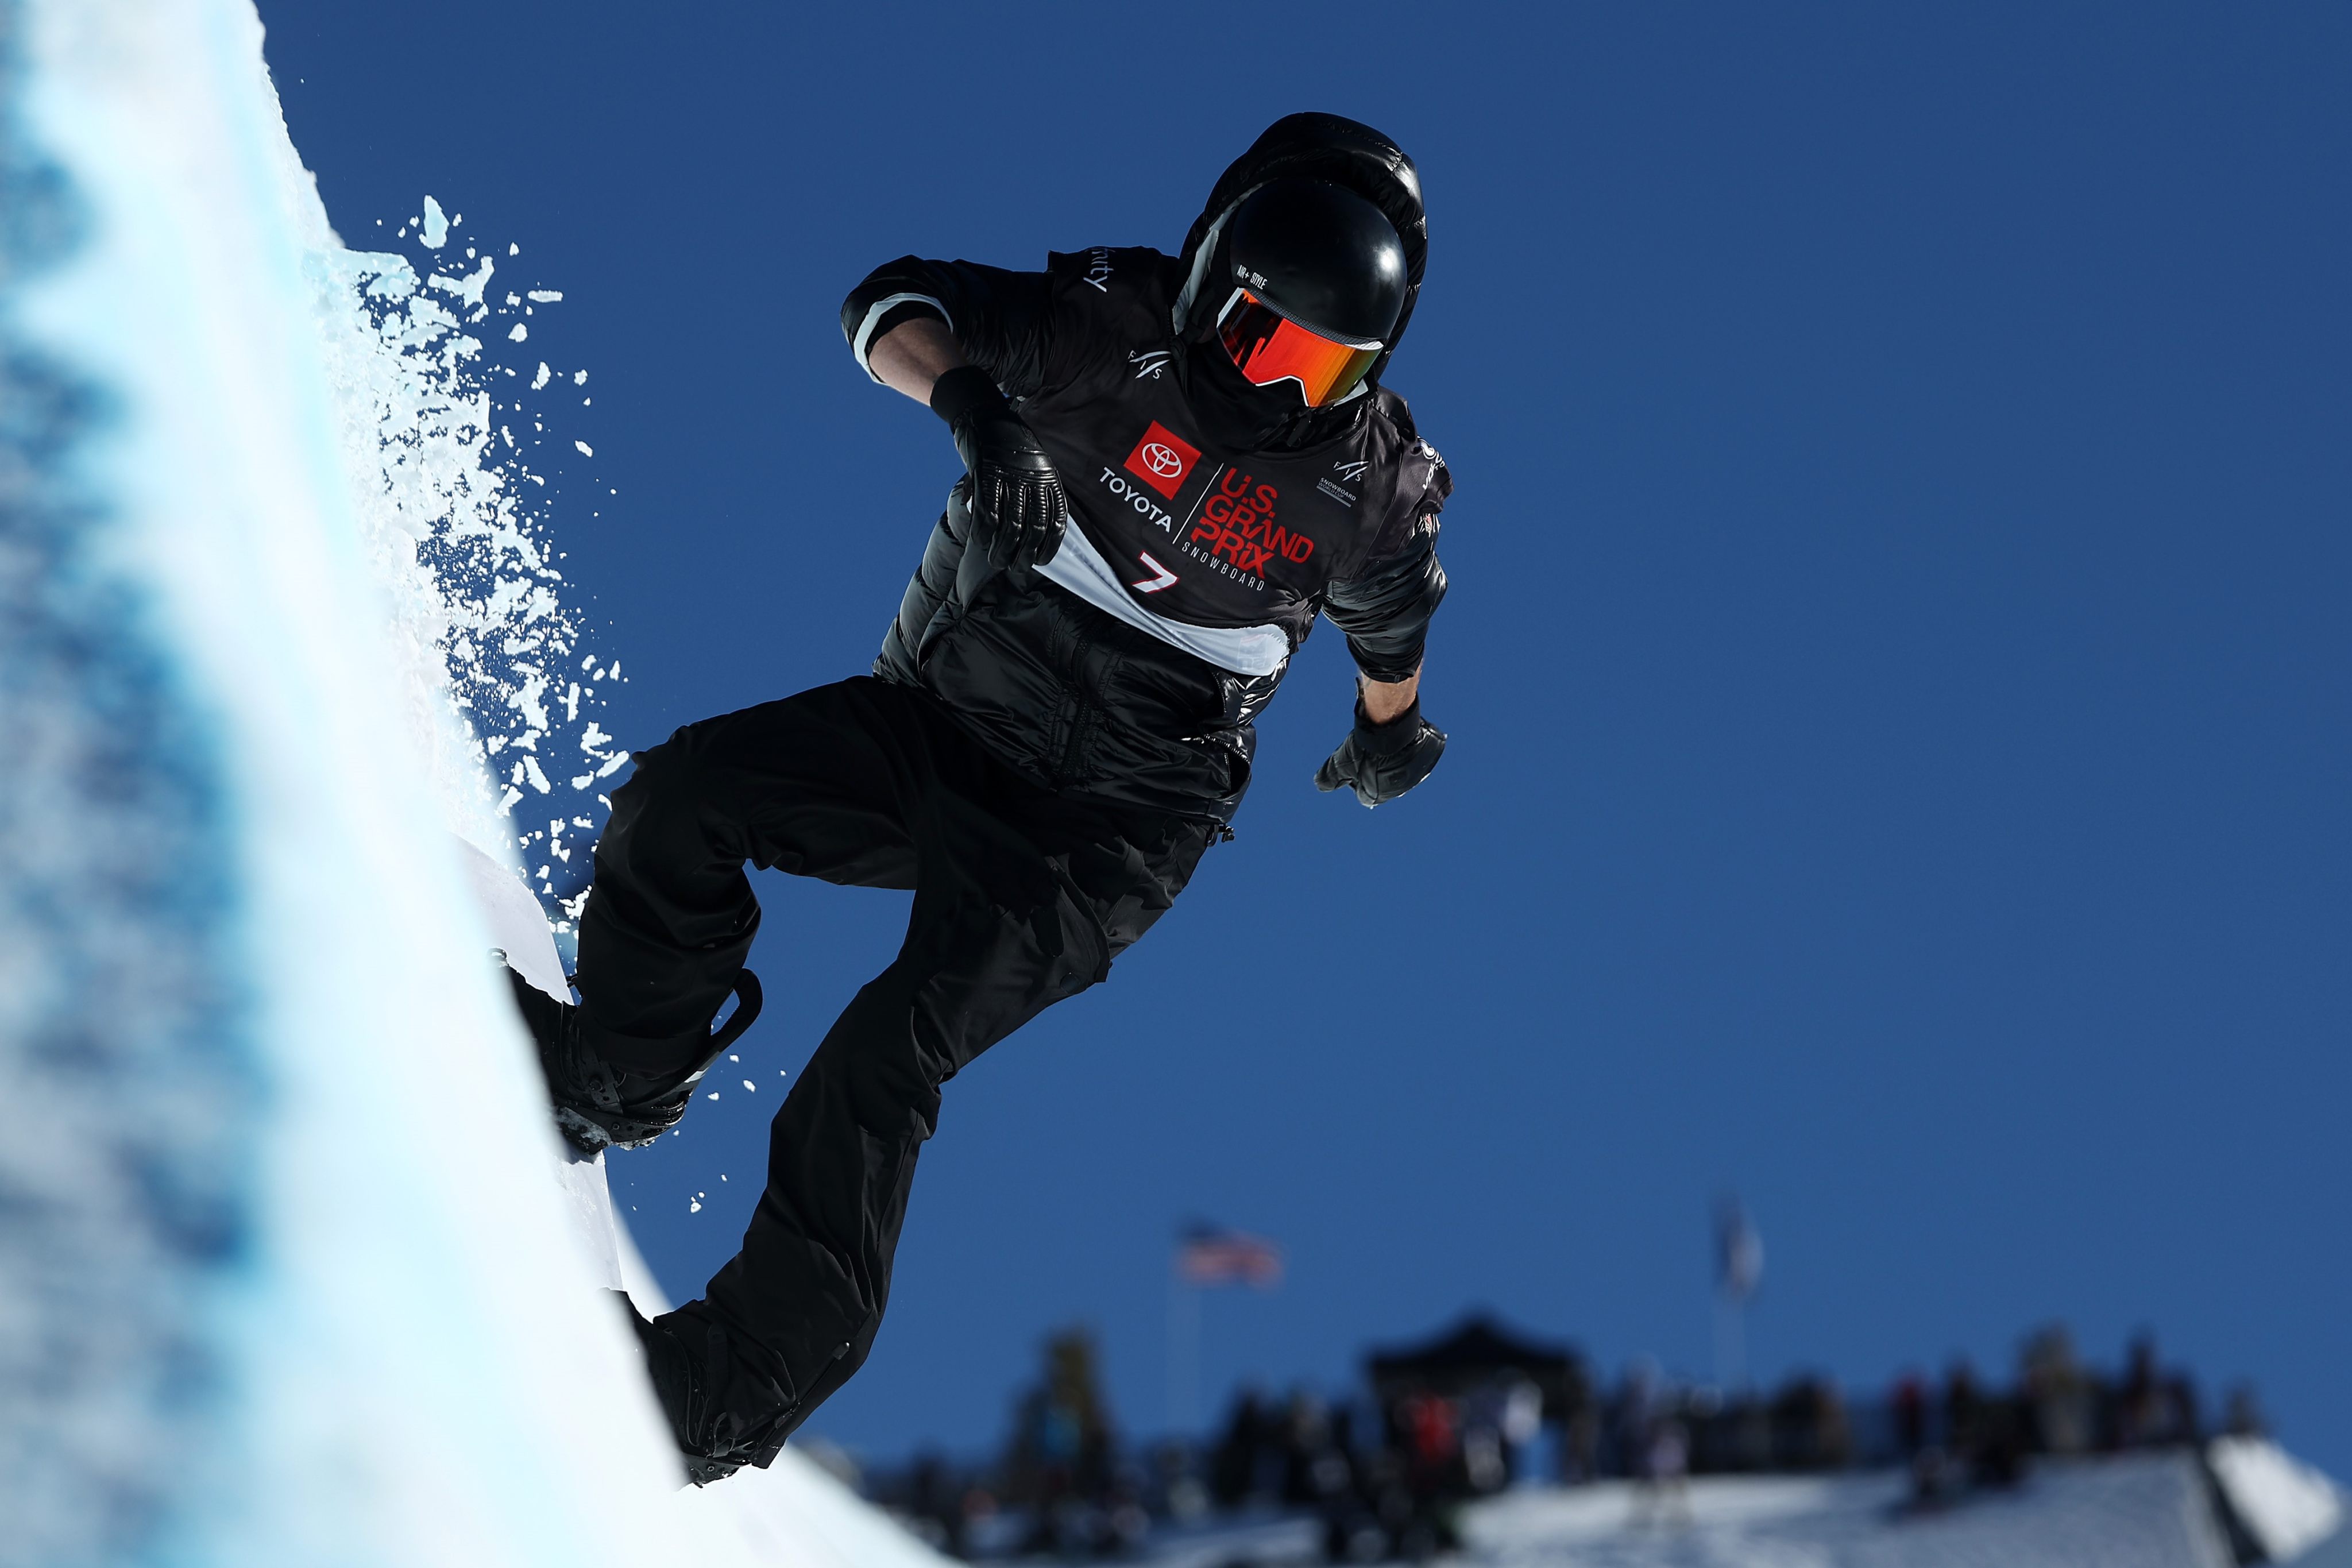 2014 Sochi Olympic snowboarding results: Shaun White fails to capture gold  